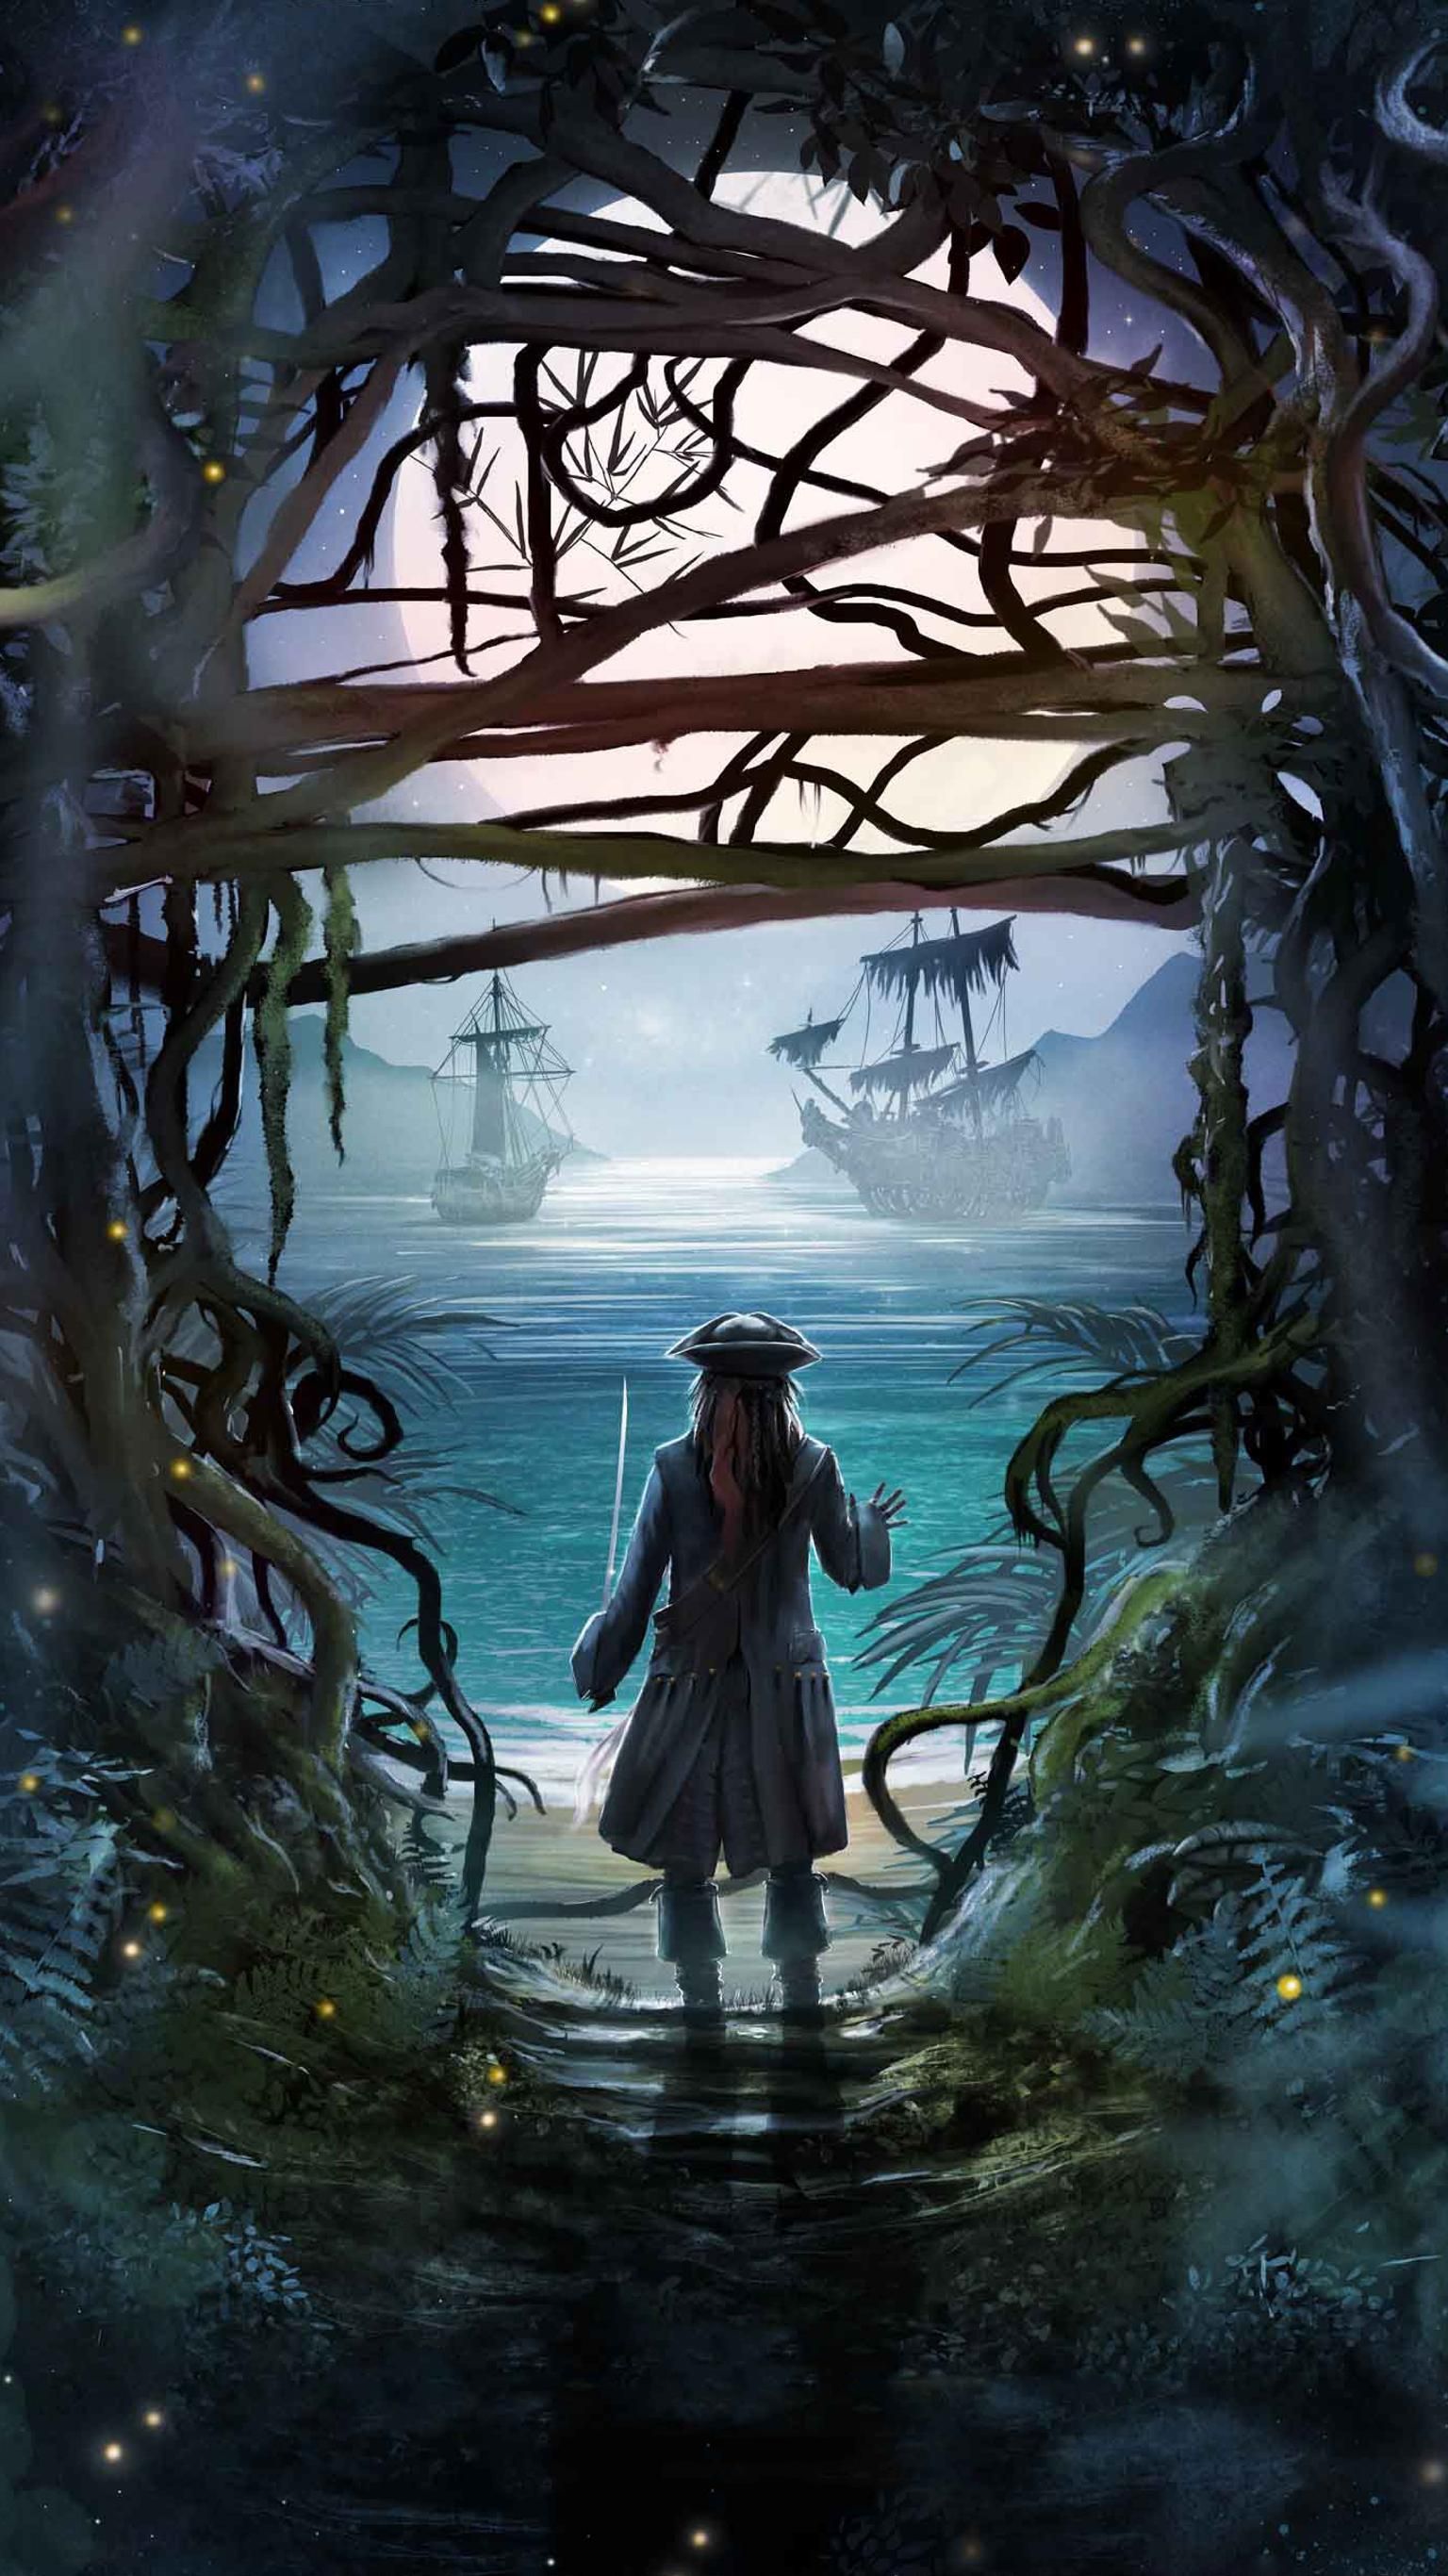 Wallpaper iPhone Pirates of the Caribbean with high-resolution 1080x1920 pixel. You can use this wallpaper for your iPhone 5, 6, 7, 8, X, XS, XR backgrounds, Mobile Screensaver, or iPad Lock Screen - Pirate